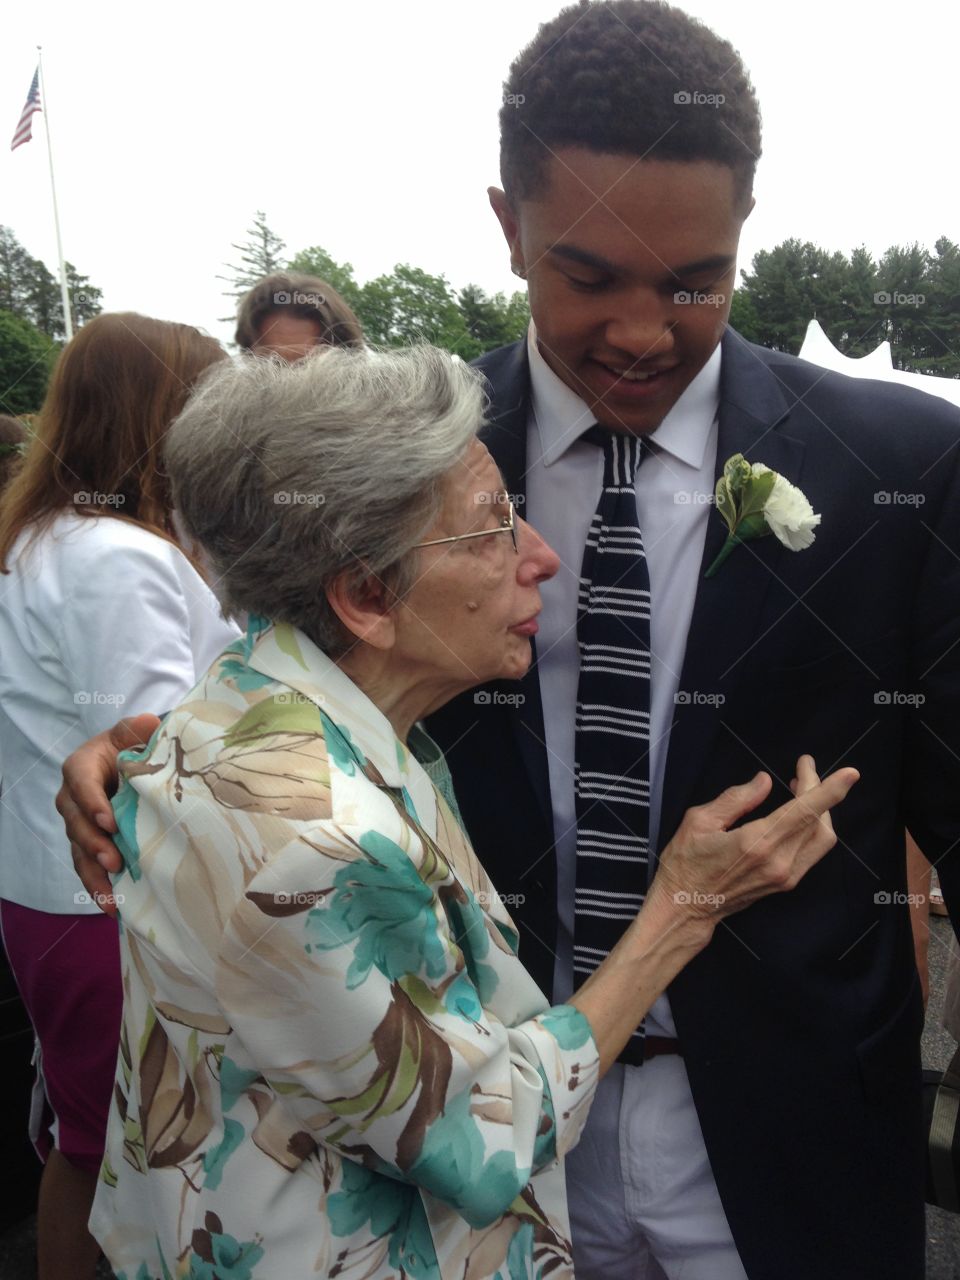 Memere and Jordan on his graduation day! She was so proud!! 